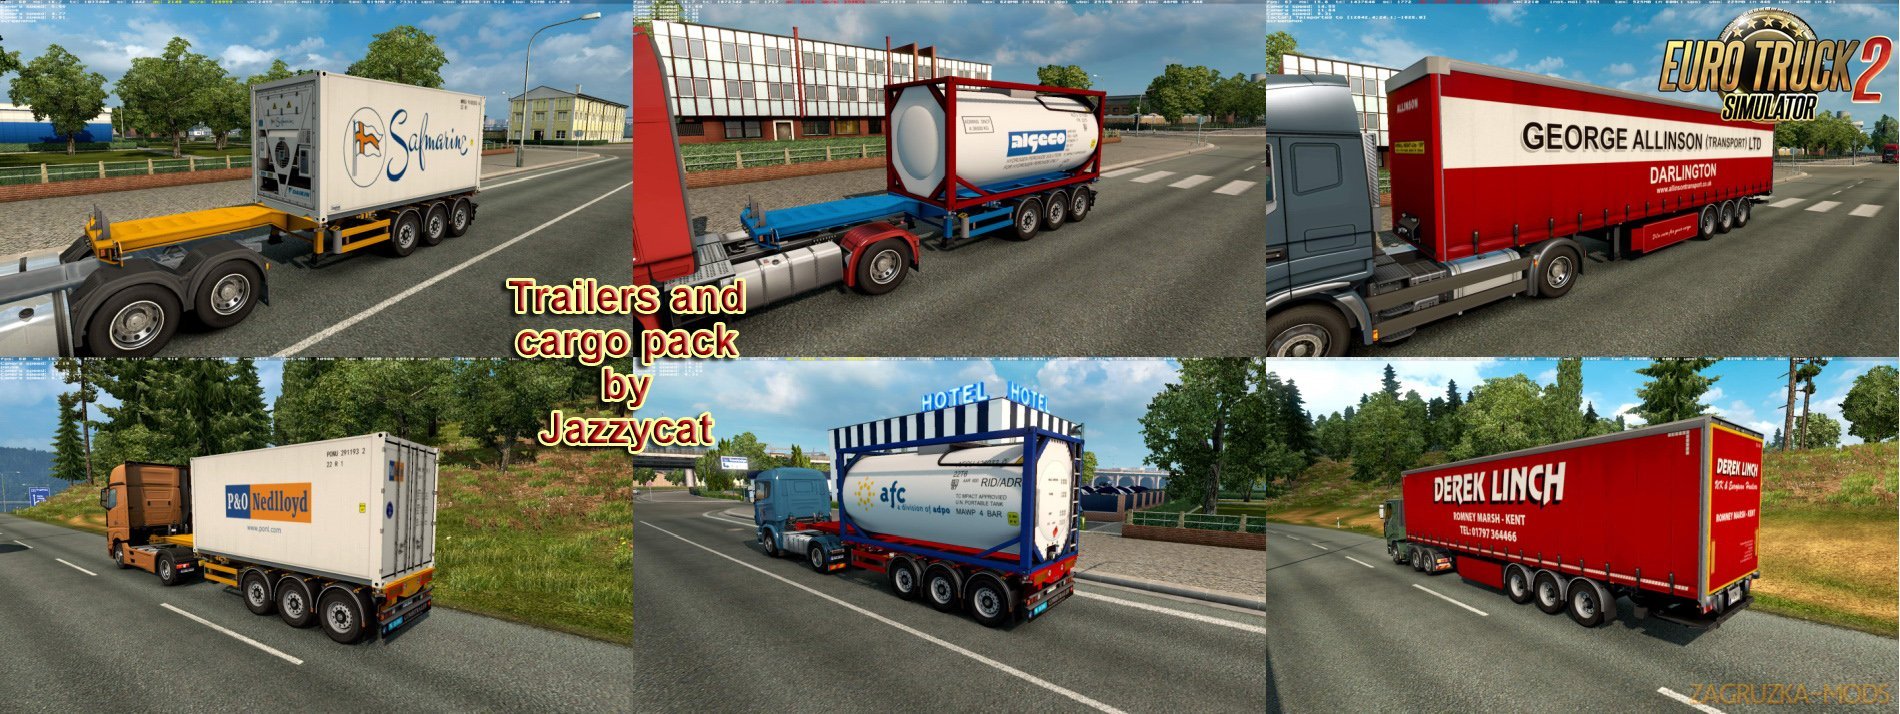 Trailers and Cargo Pack v5.8 by Jazzycat